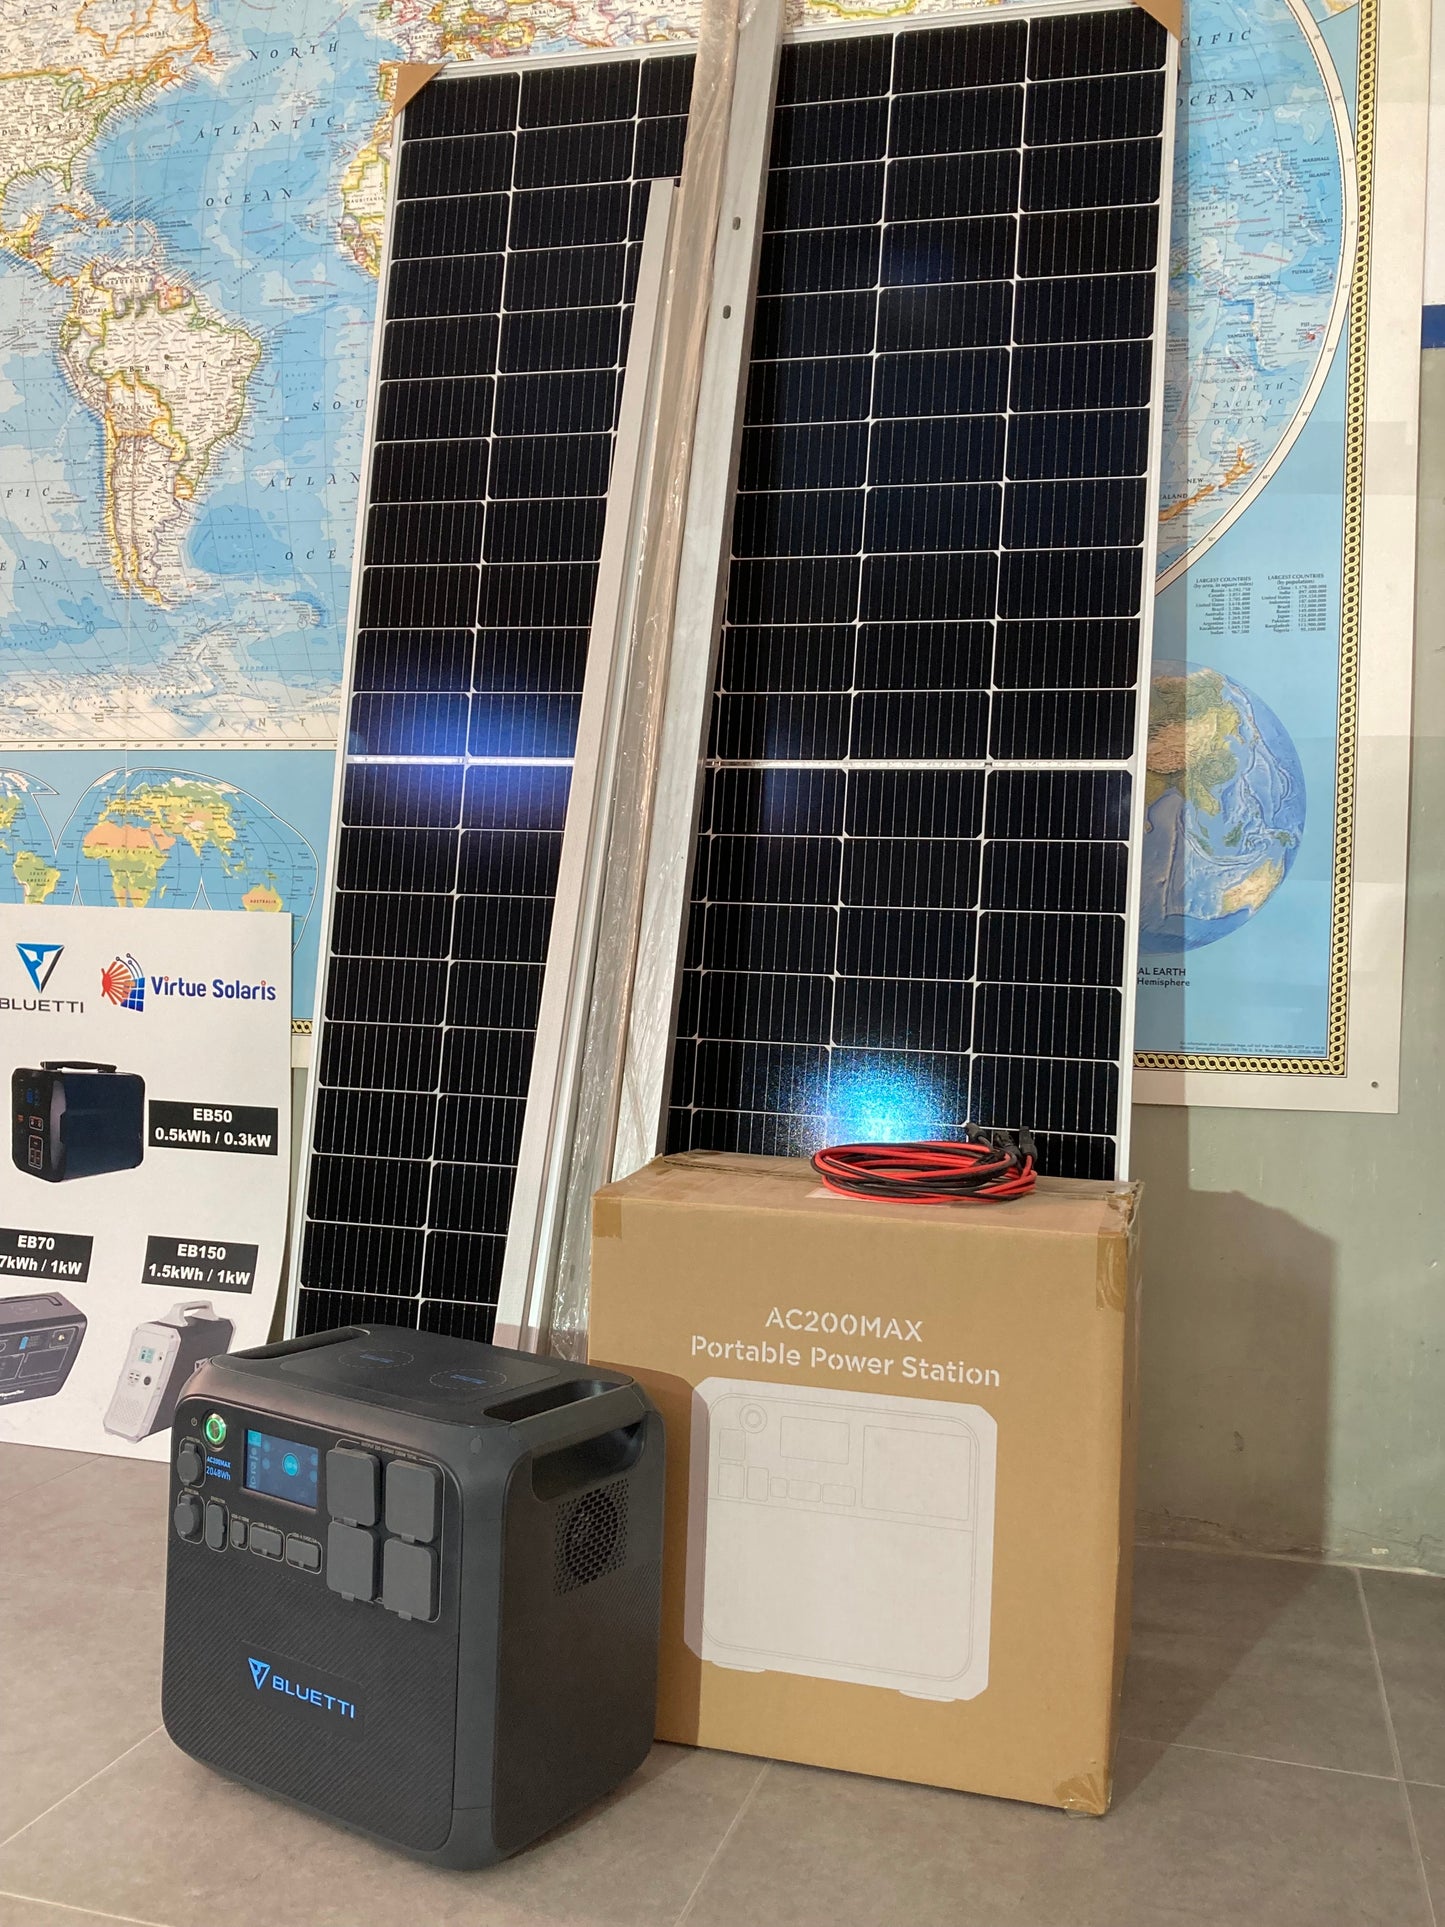 Off-grid solar power kit: Bluetti AC200 MAX solar generator + 385Wp solar panel, mounting and cabling accessories